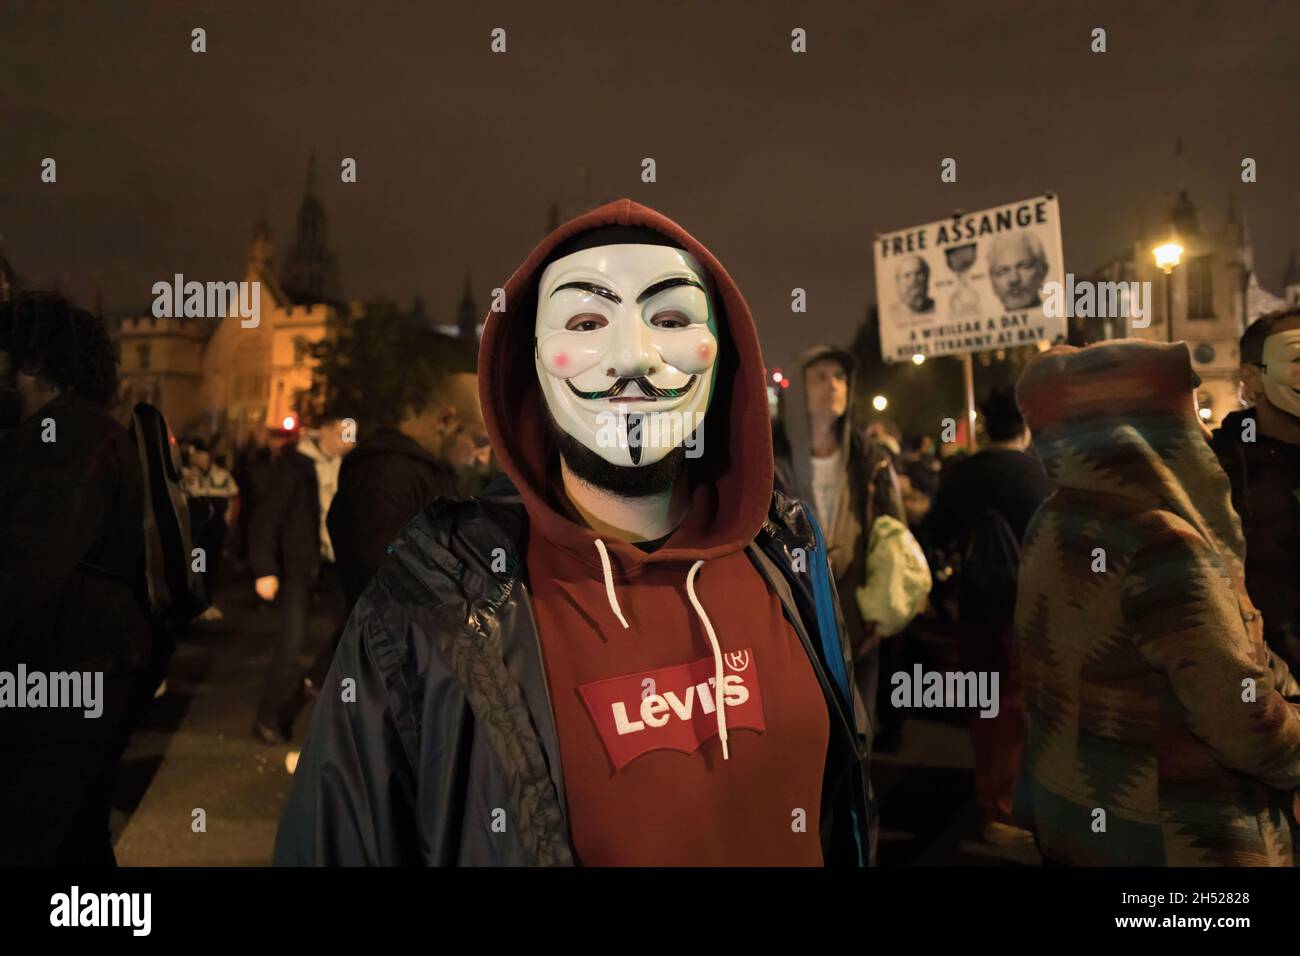 London, UK. 05th Nov, 2021. A demonstrator is seen wearing the Anonymous mask during the Guy Fawkes night.Guy Fawkes Night is an annual celebration in memory of the Gunpowder Plot, an attempt to burn down the Parliament in London on 5th Nov 1605. The protest was held by anti-establishment hacktivist group Anonymous. Demonstrators are seen setting fireworks and gas bombs outside Parliament while wearing the Guy Fawkes Mask. Credit: SOPA Images Limited/Alamy Live News Stock Photo